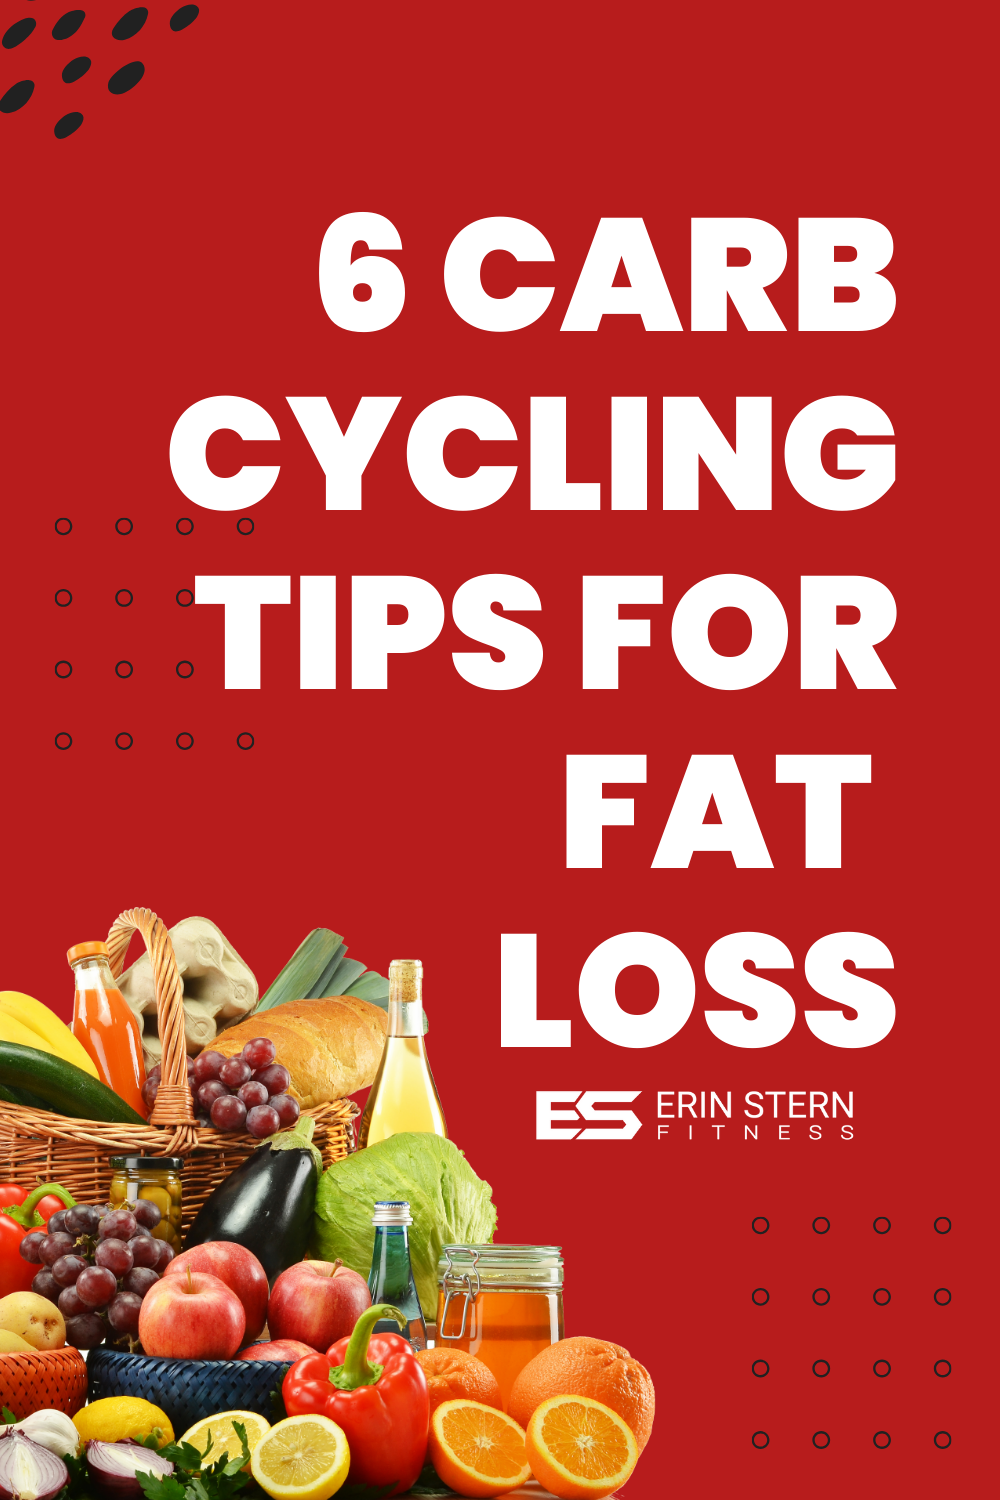 6 Carb Cycling Tips for Fat Loss